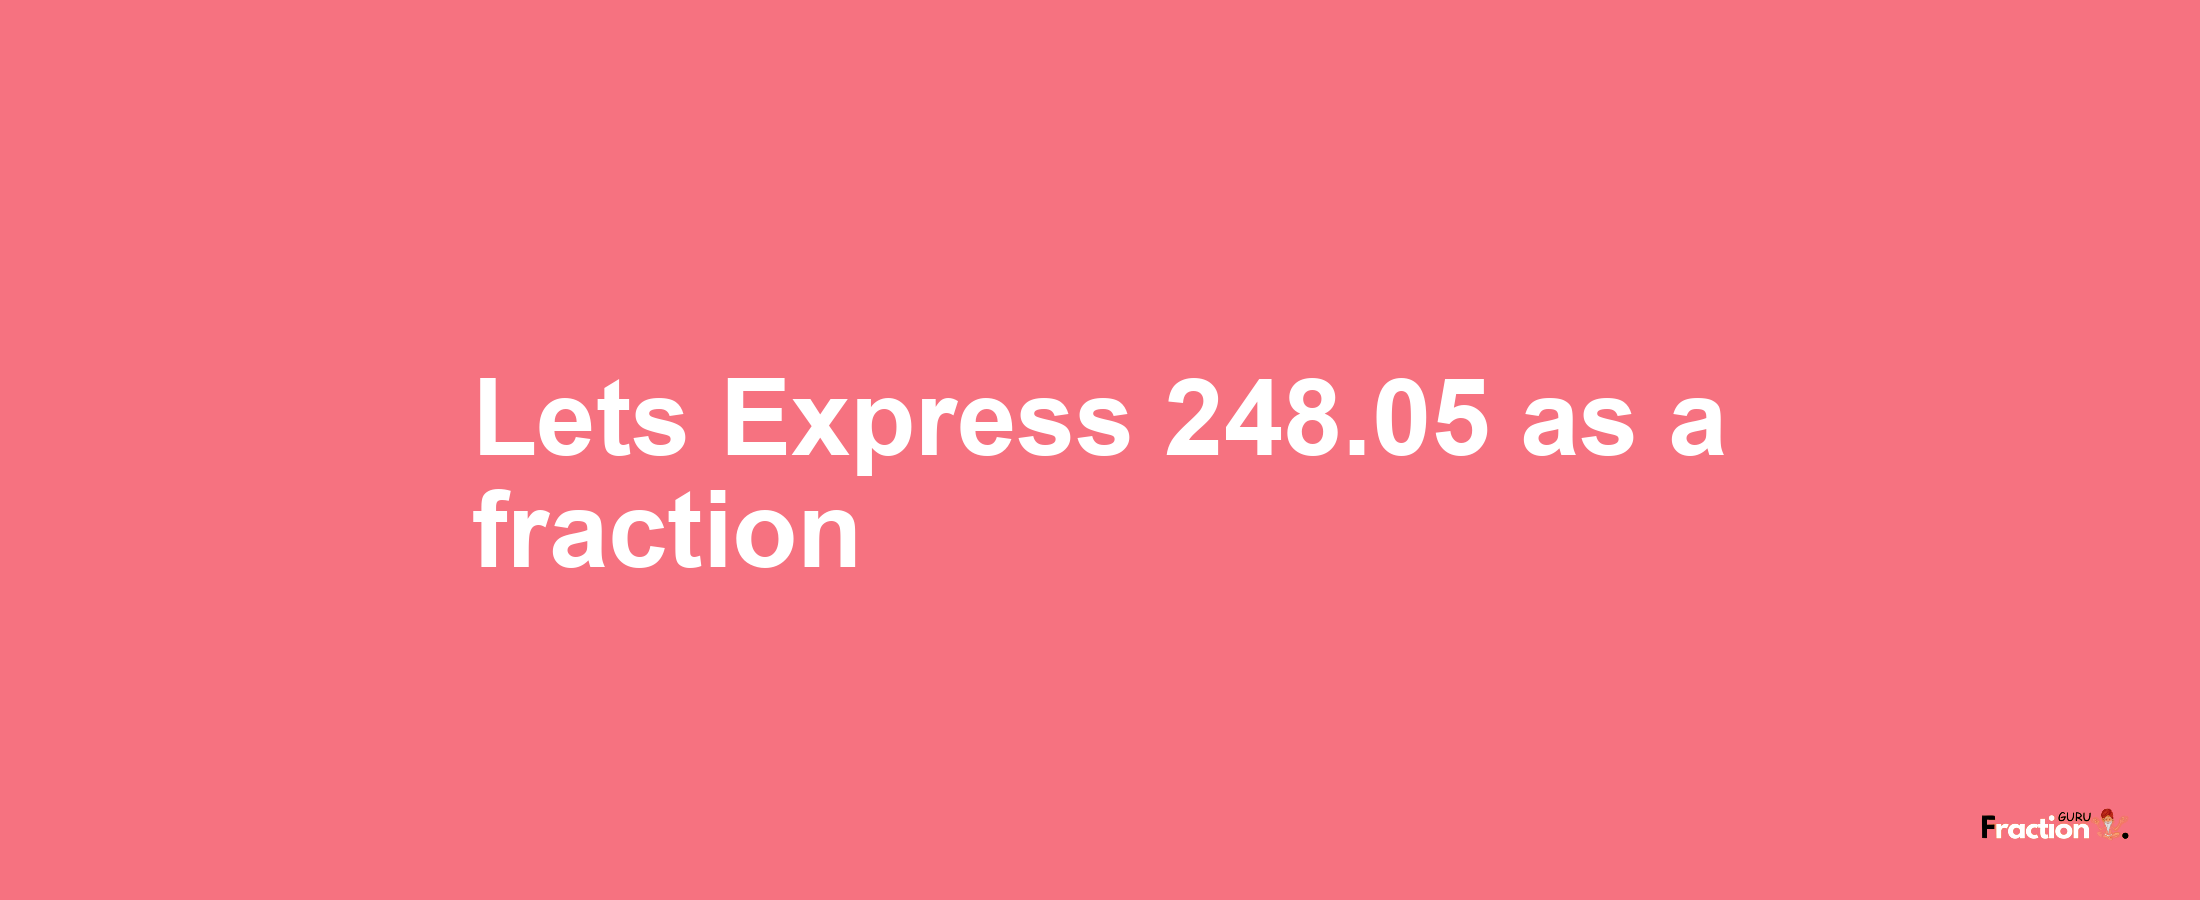 Lets Express 248.05 as afraction